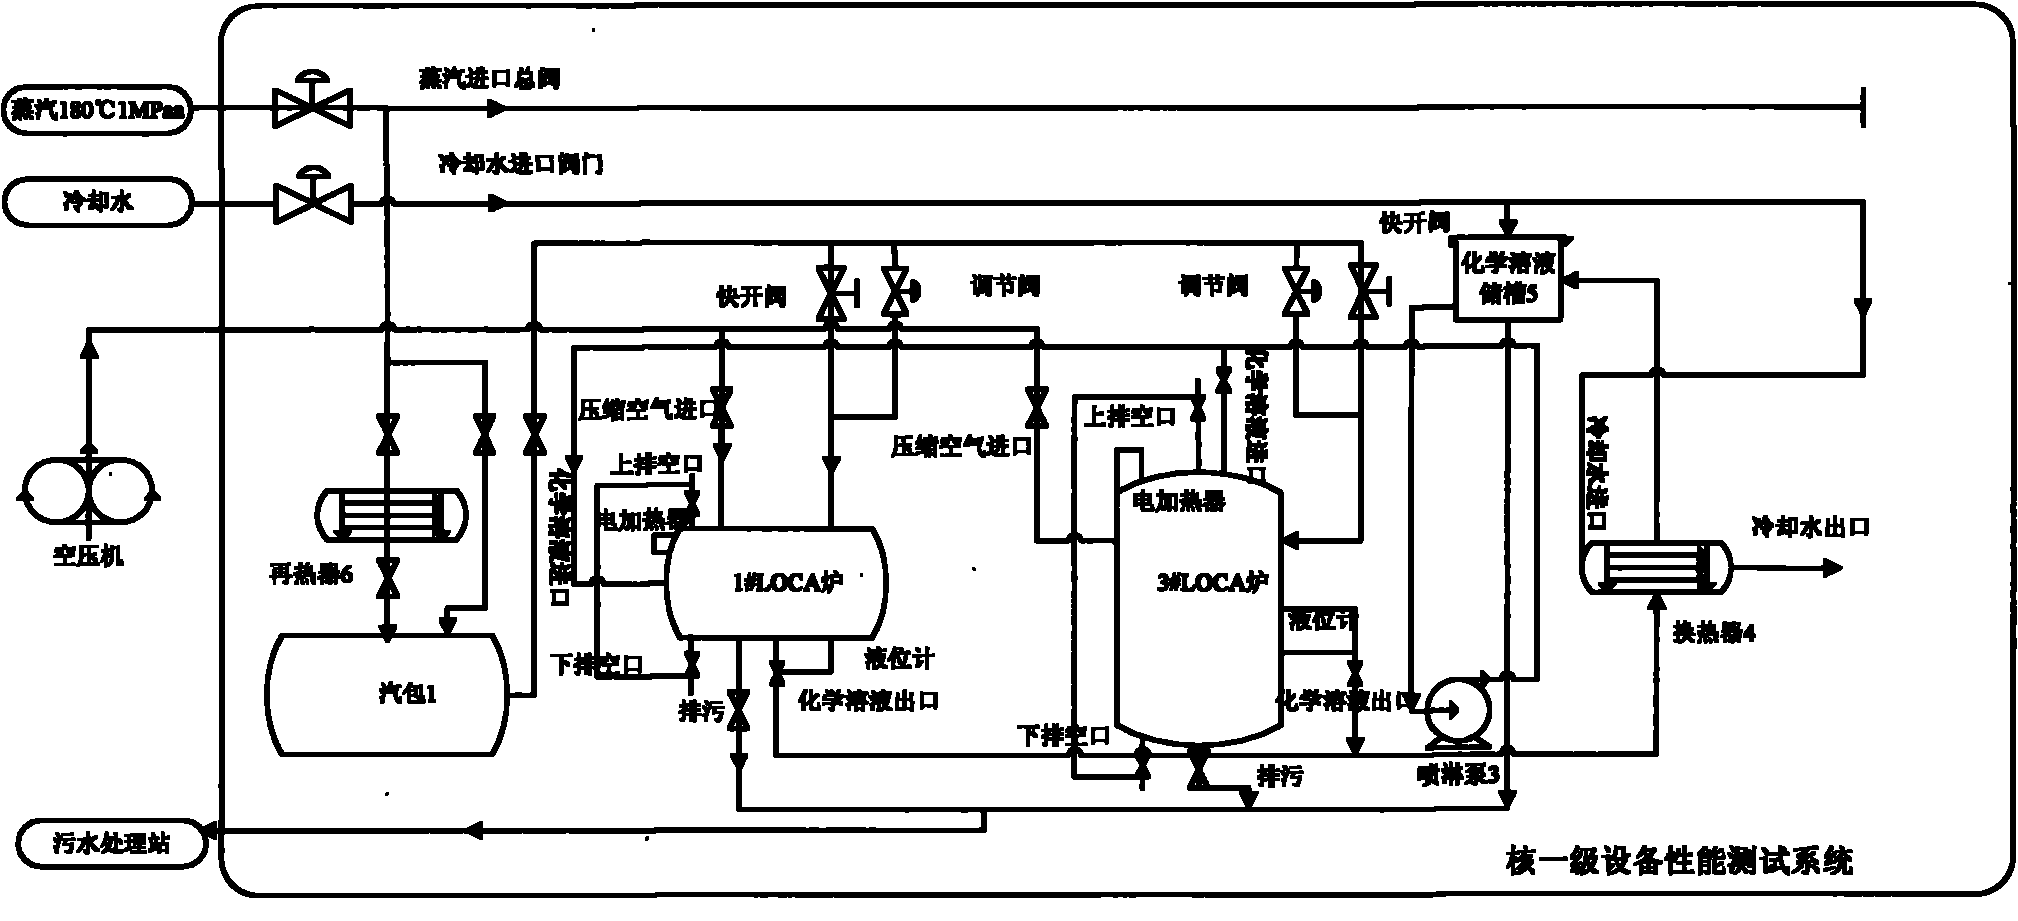 Nuclear class-1 equipment performance test system and method